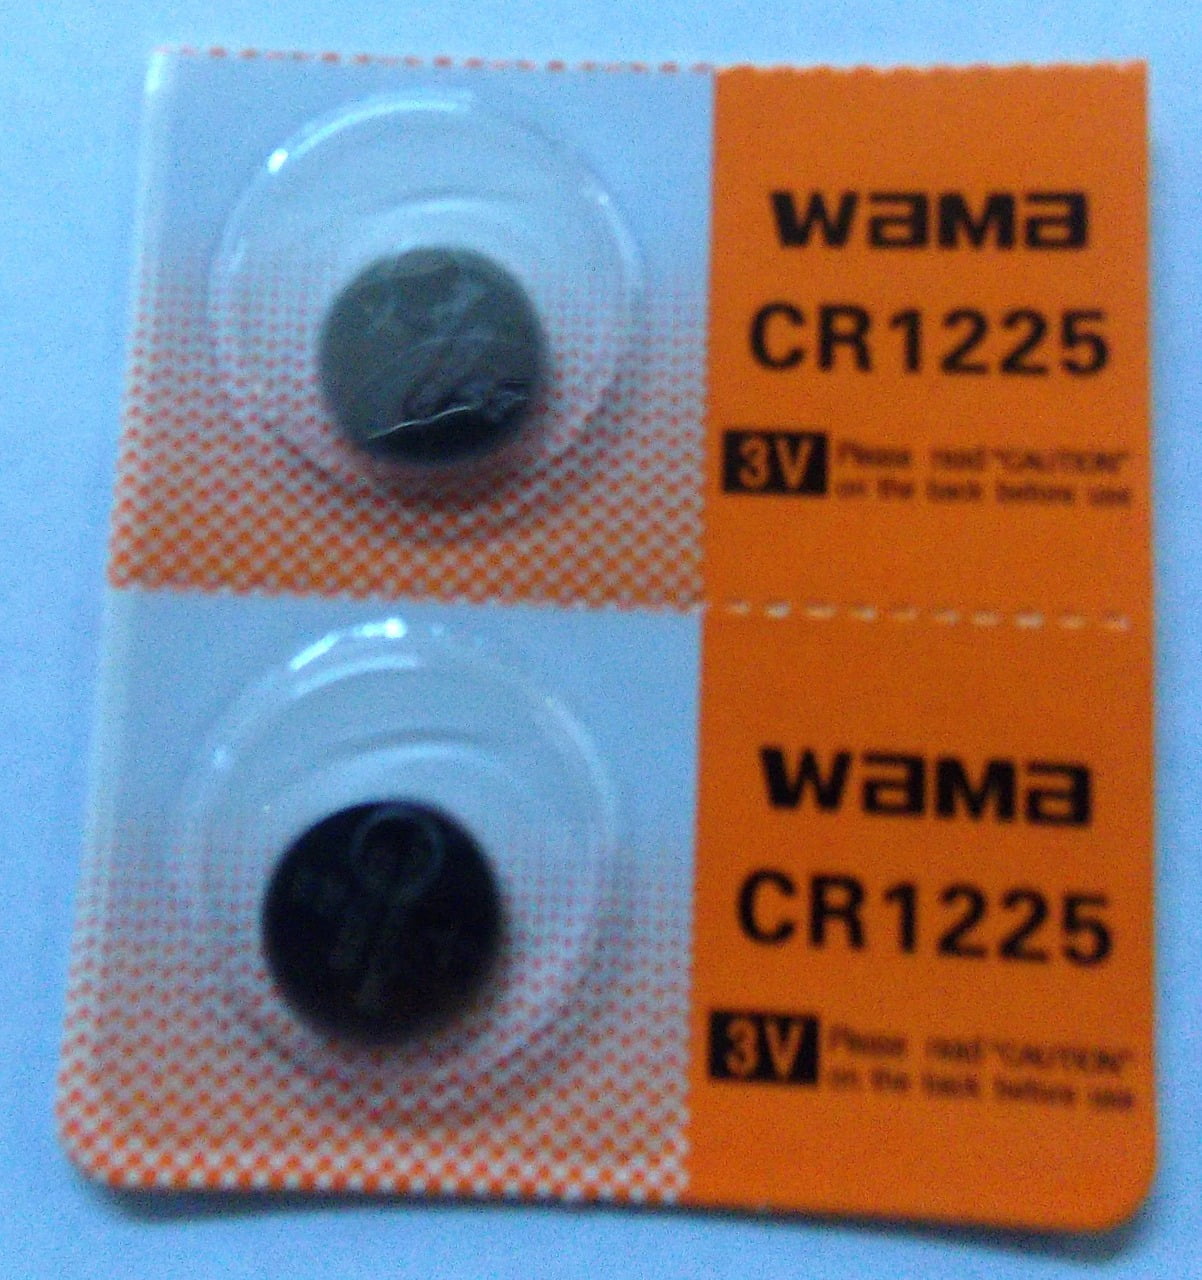 BBW CR2430 3V Lithium Coin Battery - 5 Pack + FREE SHIPPING